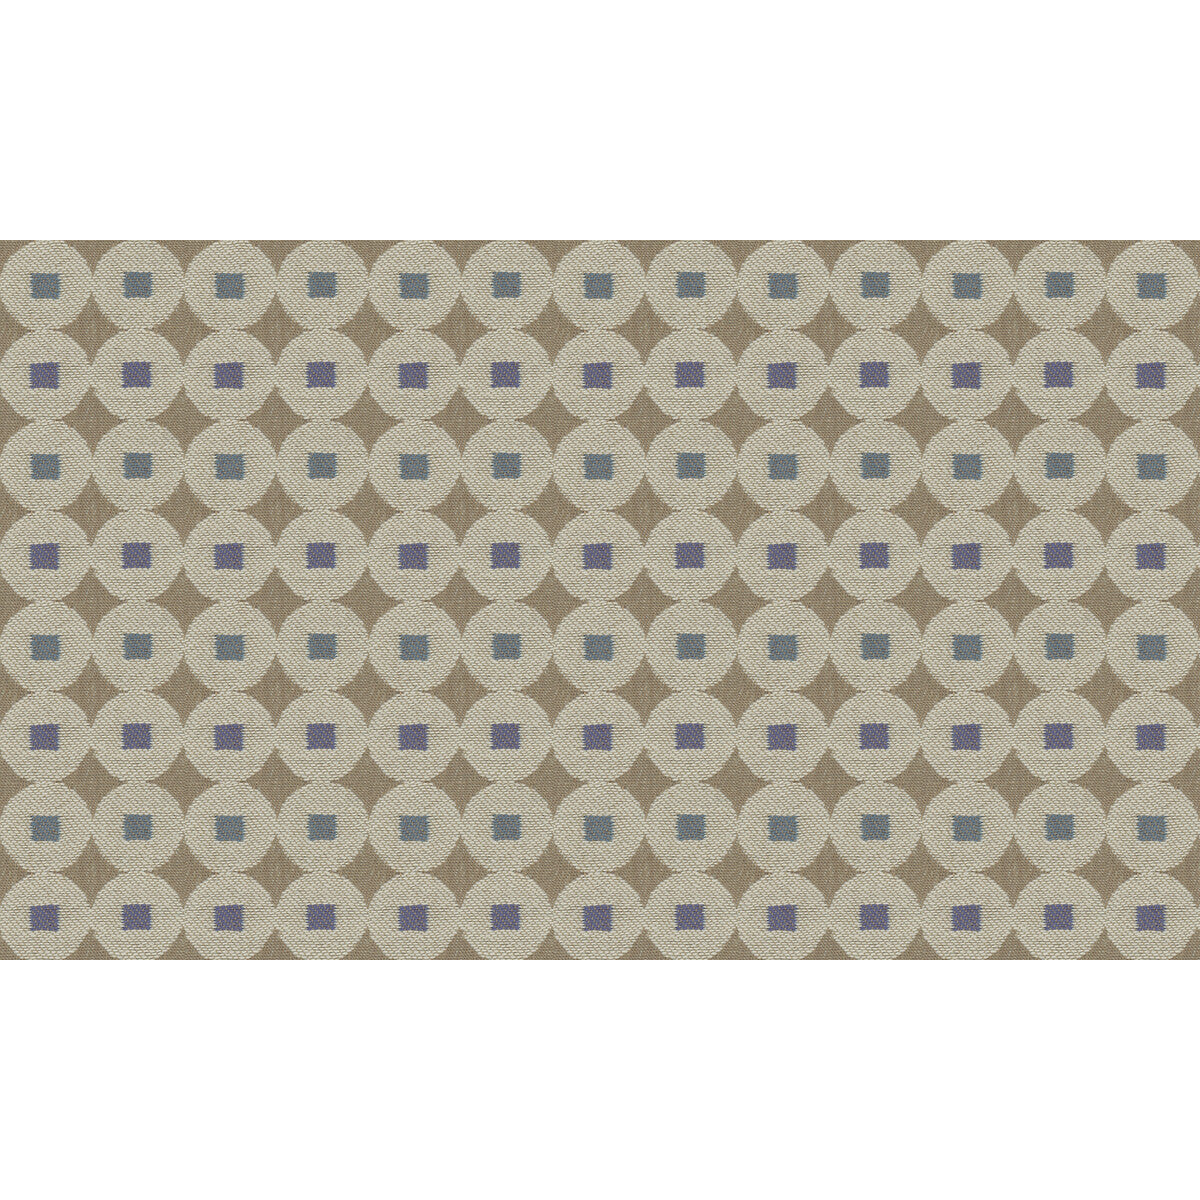 Tiempo fabric in amalfi color - pattern 34651.516.0 - by Kravet Contract in the Gis collection